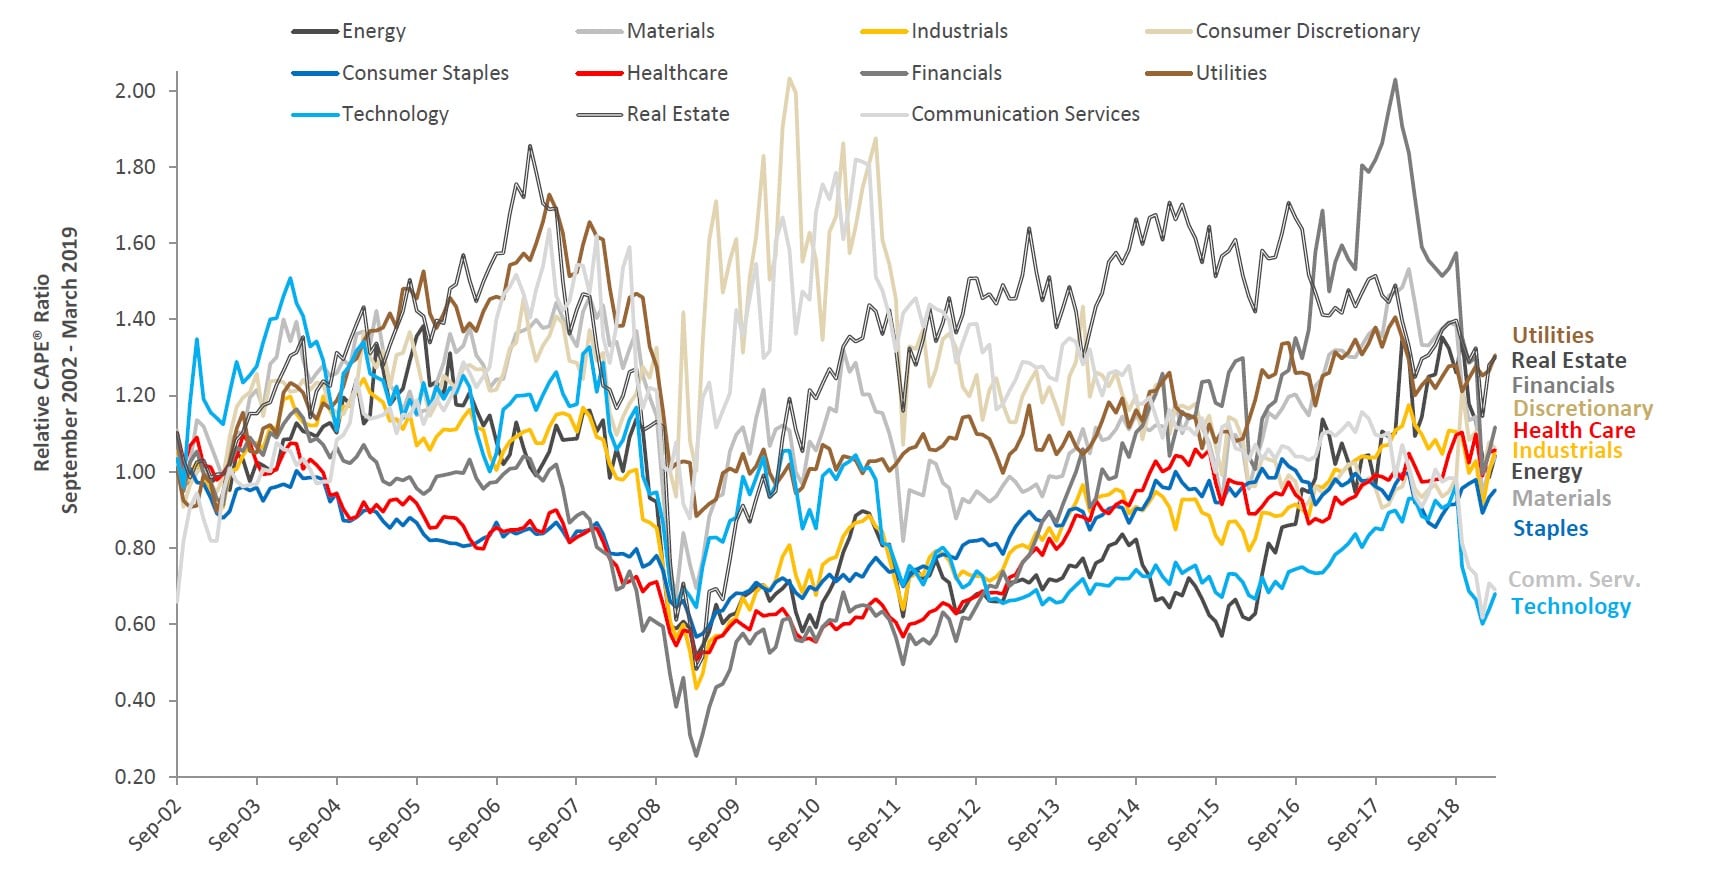 Cyclically Adjusted Price Earnings ratio